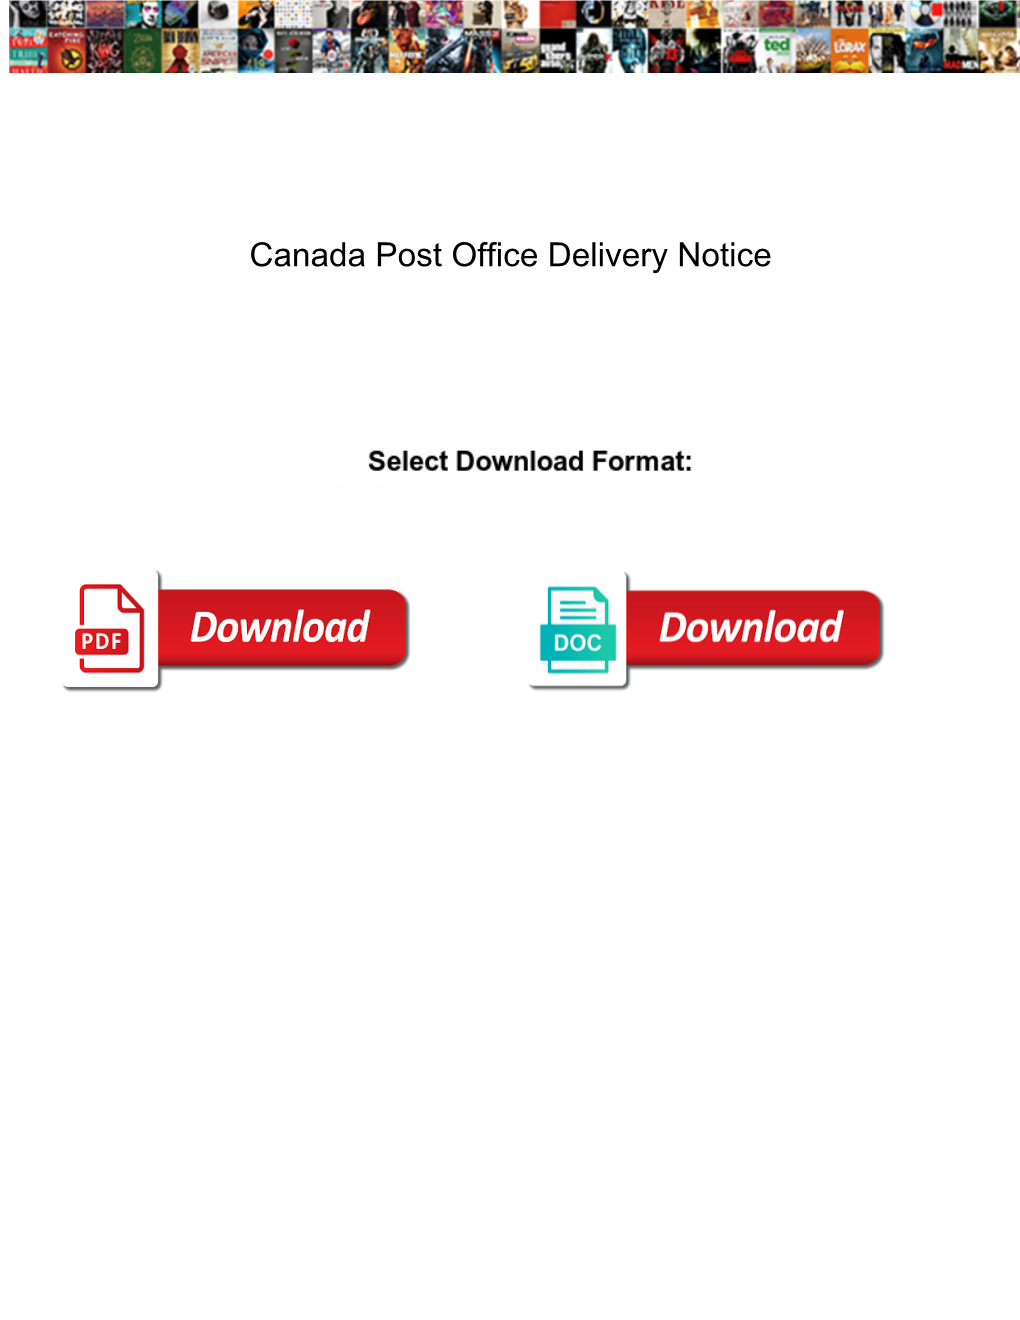 Canada Post Office Delivery Notice